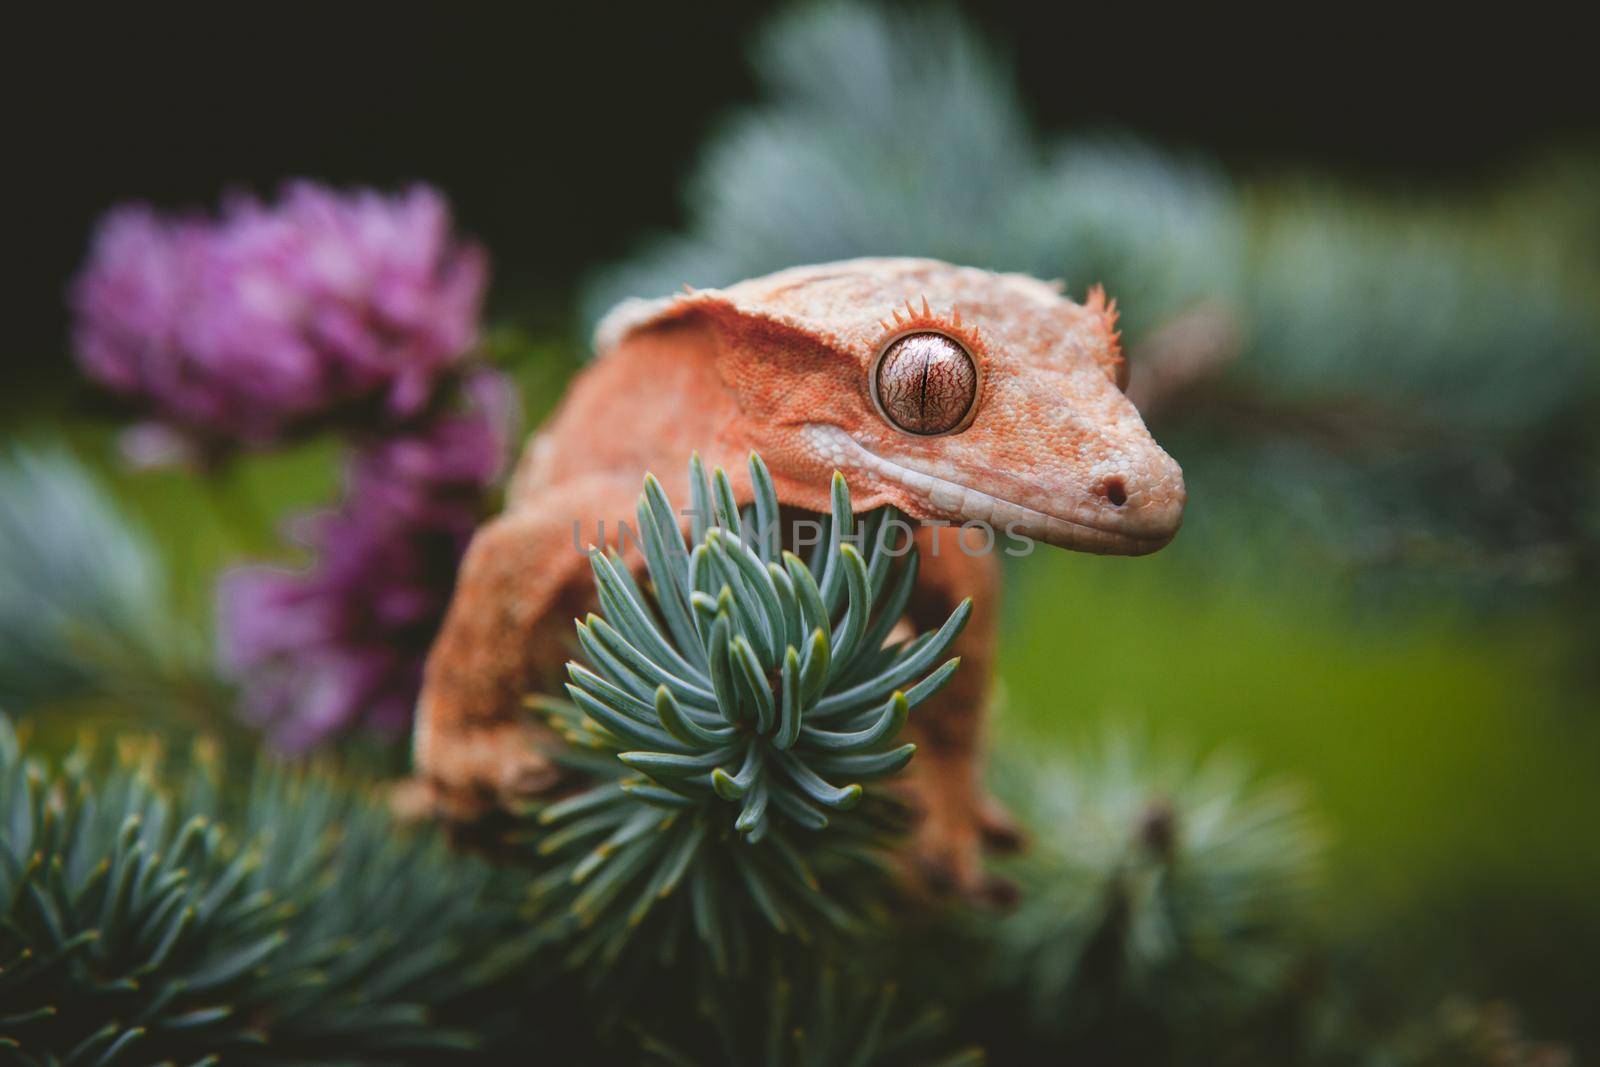 New Caledonian crested gecko on tree with flowers by RosaJay